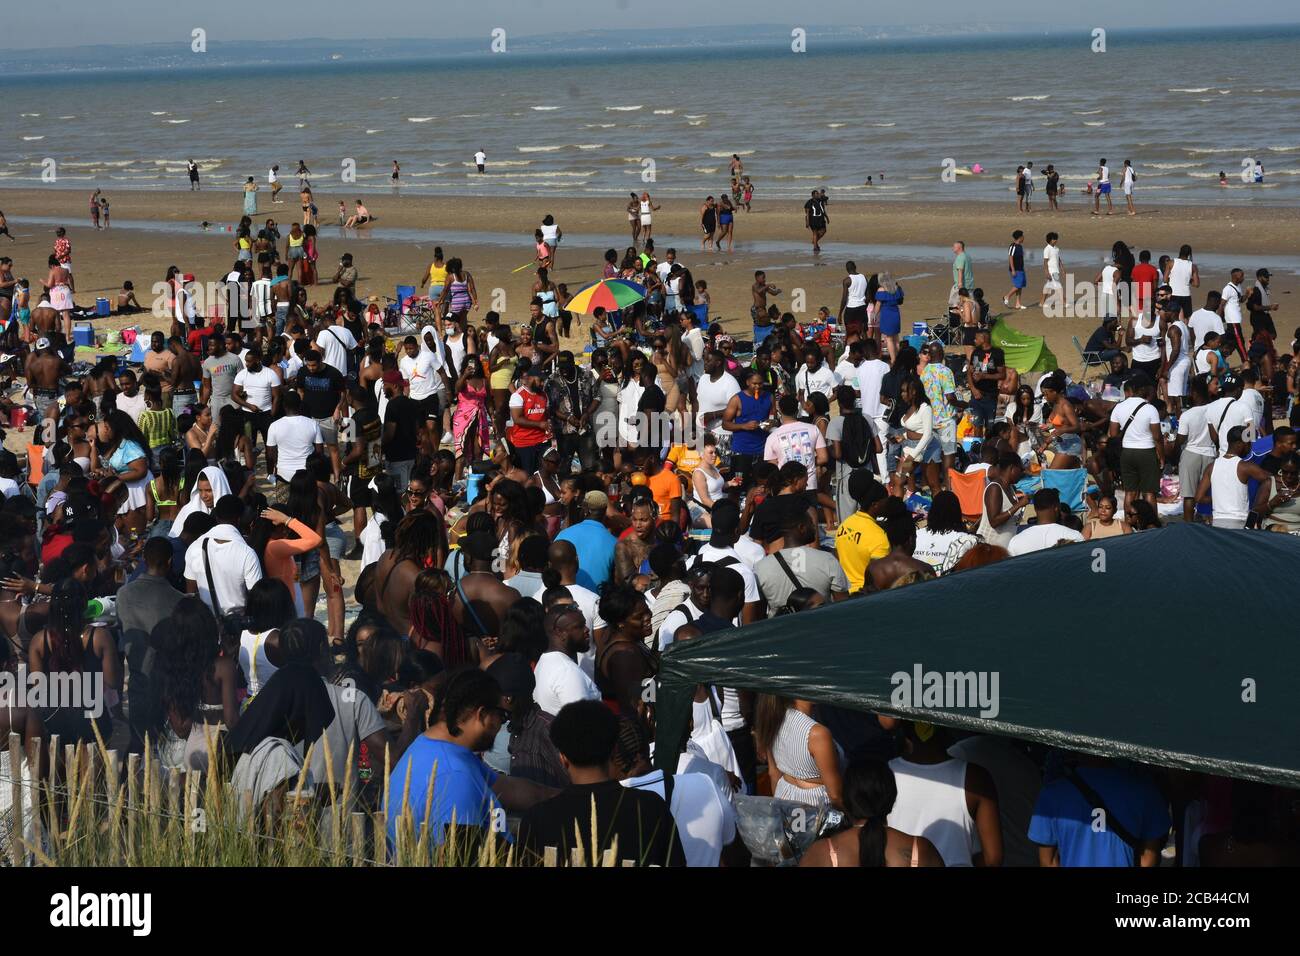 Hundreds descend upon the beach at Camber Sands to celebrate the anniversary of Jamaican independence which occurred back in 1962. Fears of a second spike of Covid 19 seemed to be in the backs of peoples minds as social distancing became difficult at times. Police presence observe the crowds at a safe distance while reminding people to keep a safe distance where possible. Event organisers encouraged social distancing throughout the day and asked everybody to be as safe and tidy as possible and also made a £750 donation to local litter picking to assist with litter Stock Photo